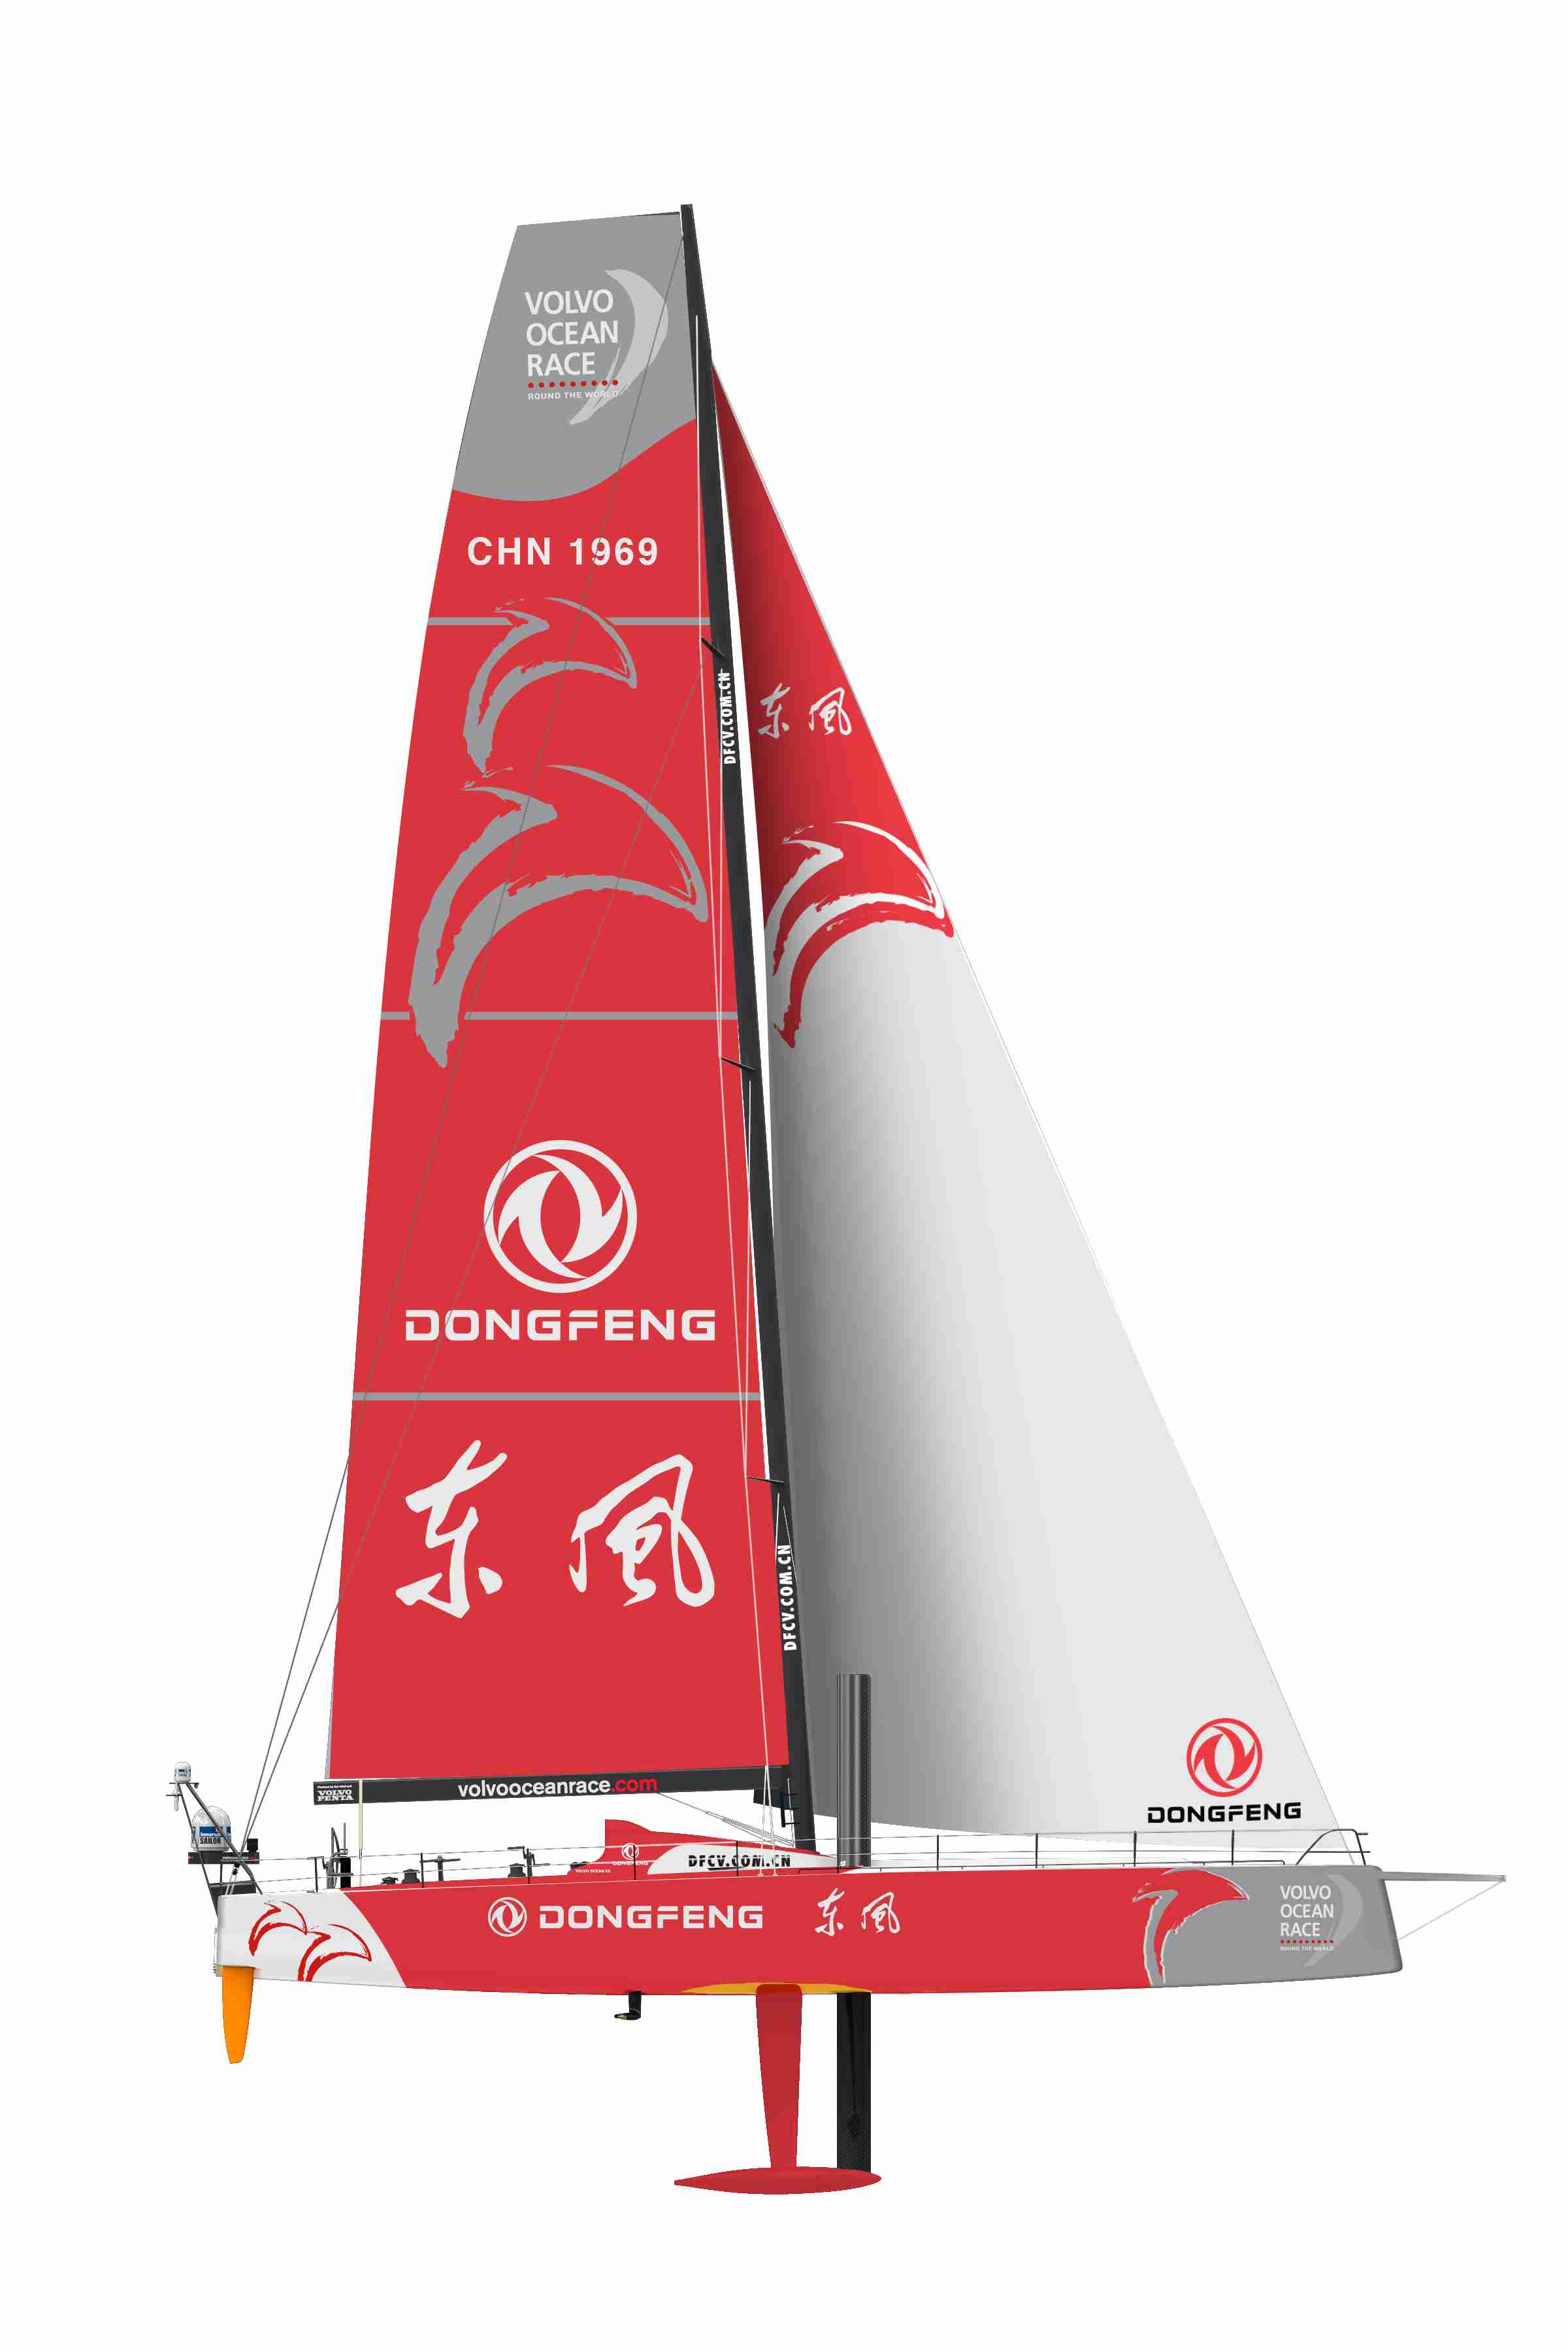 Moltissime candidature per Team Dongfeng